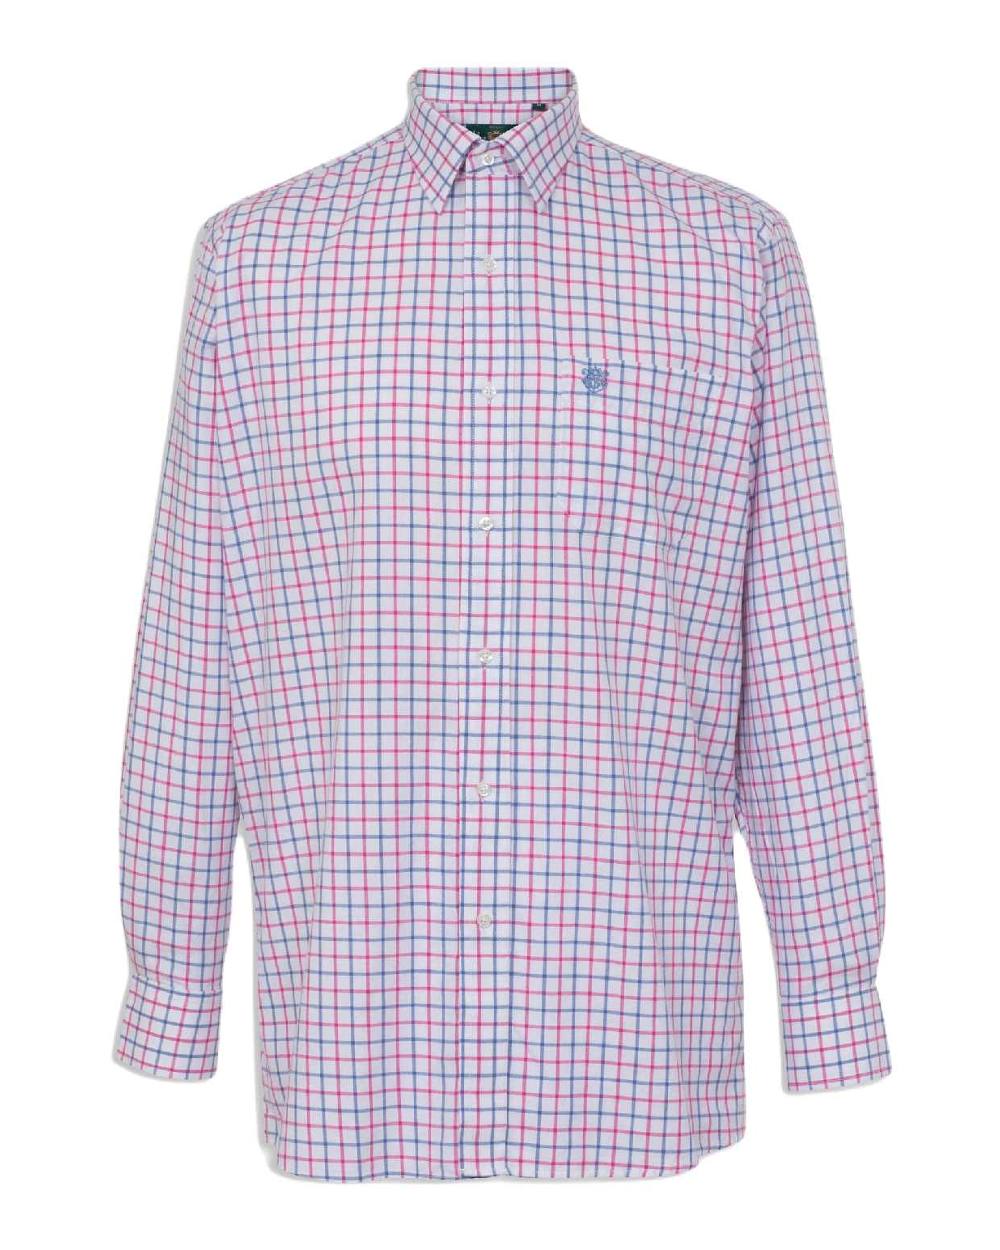 Alan Paine Ilkley Shirt in Blue/Pink 